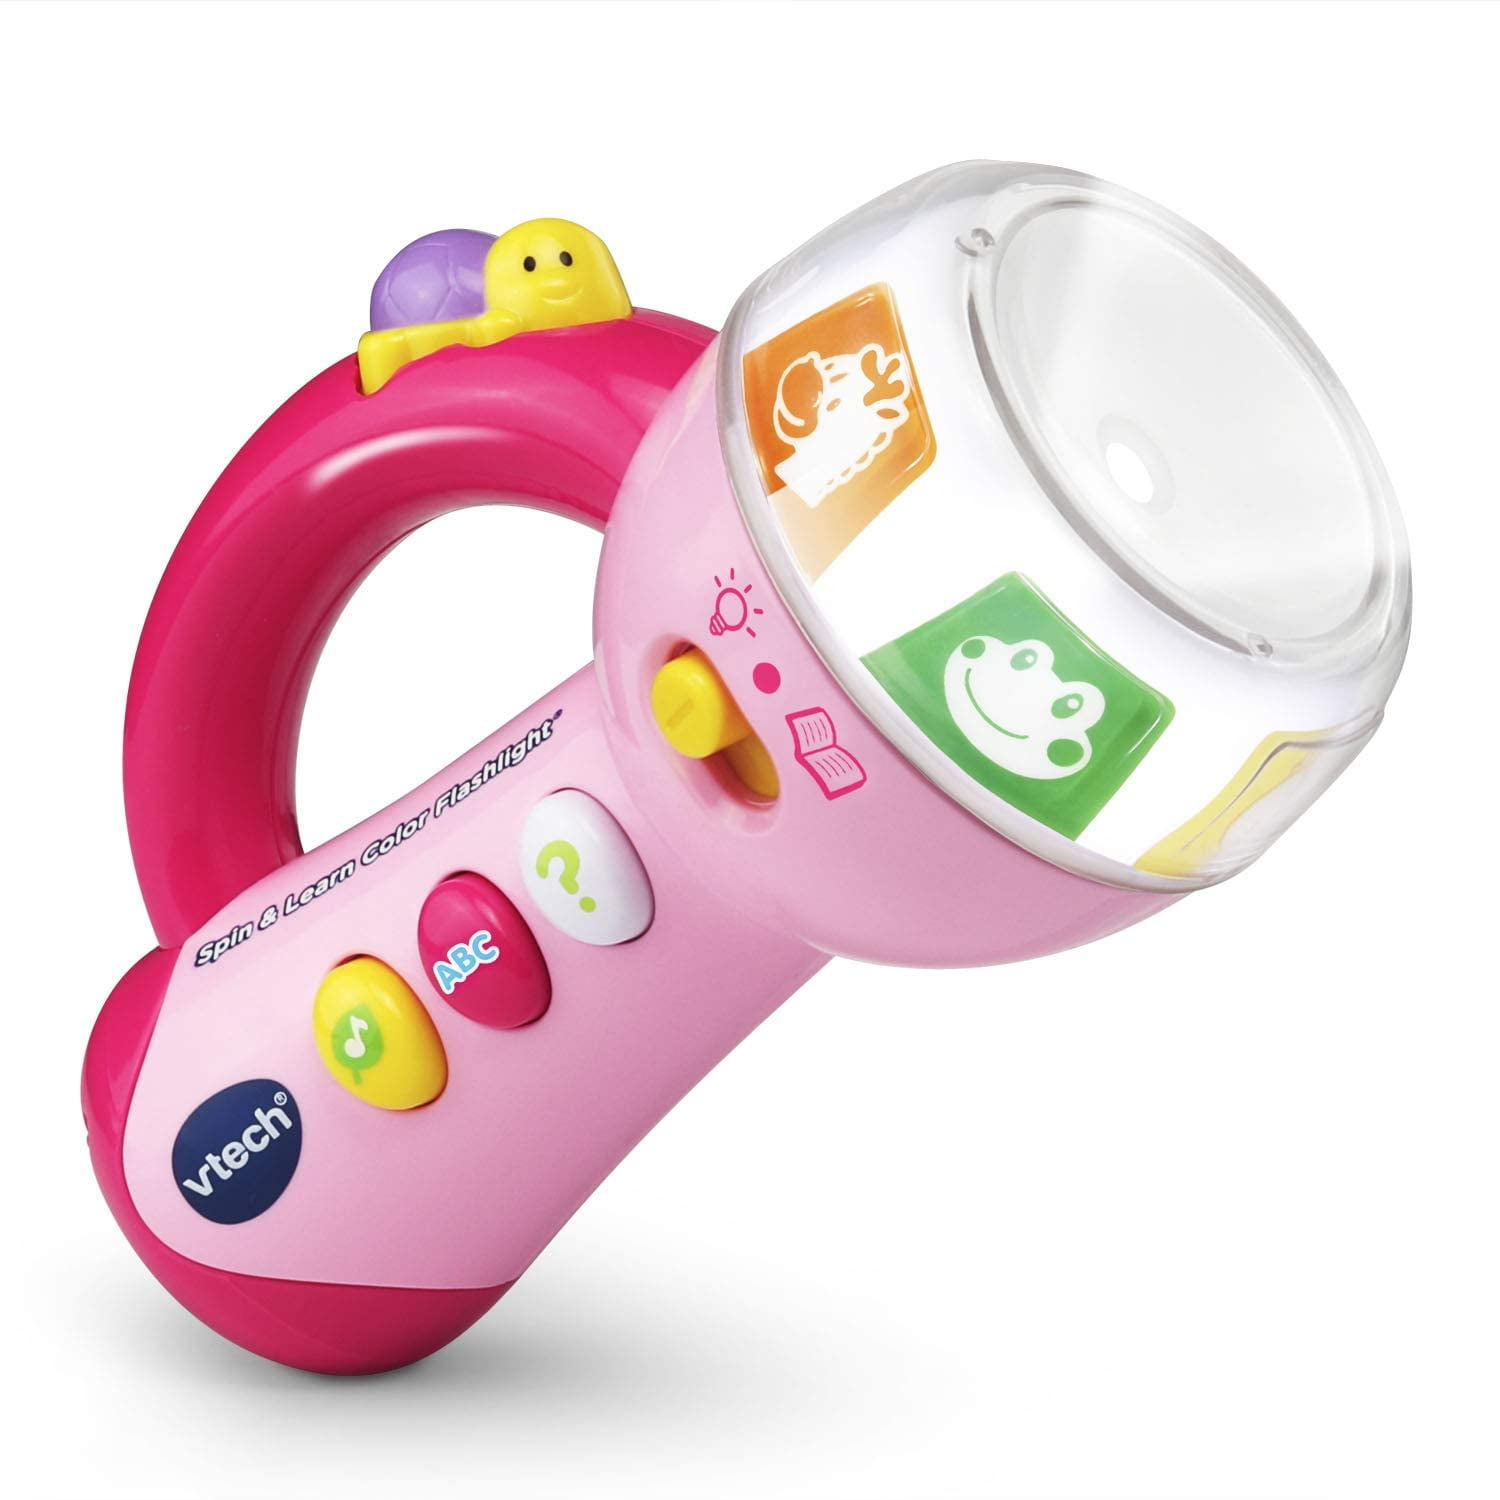 Vtech Spin & Discover Globe - Songs - Colors And Animal Sounds Learning 